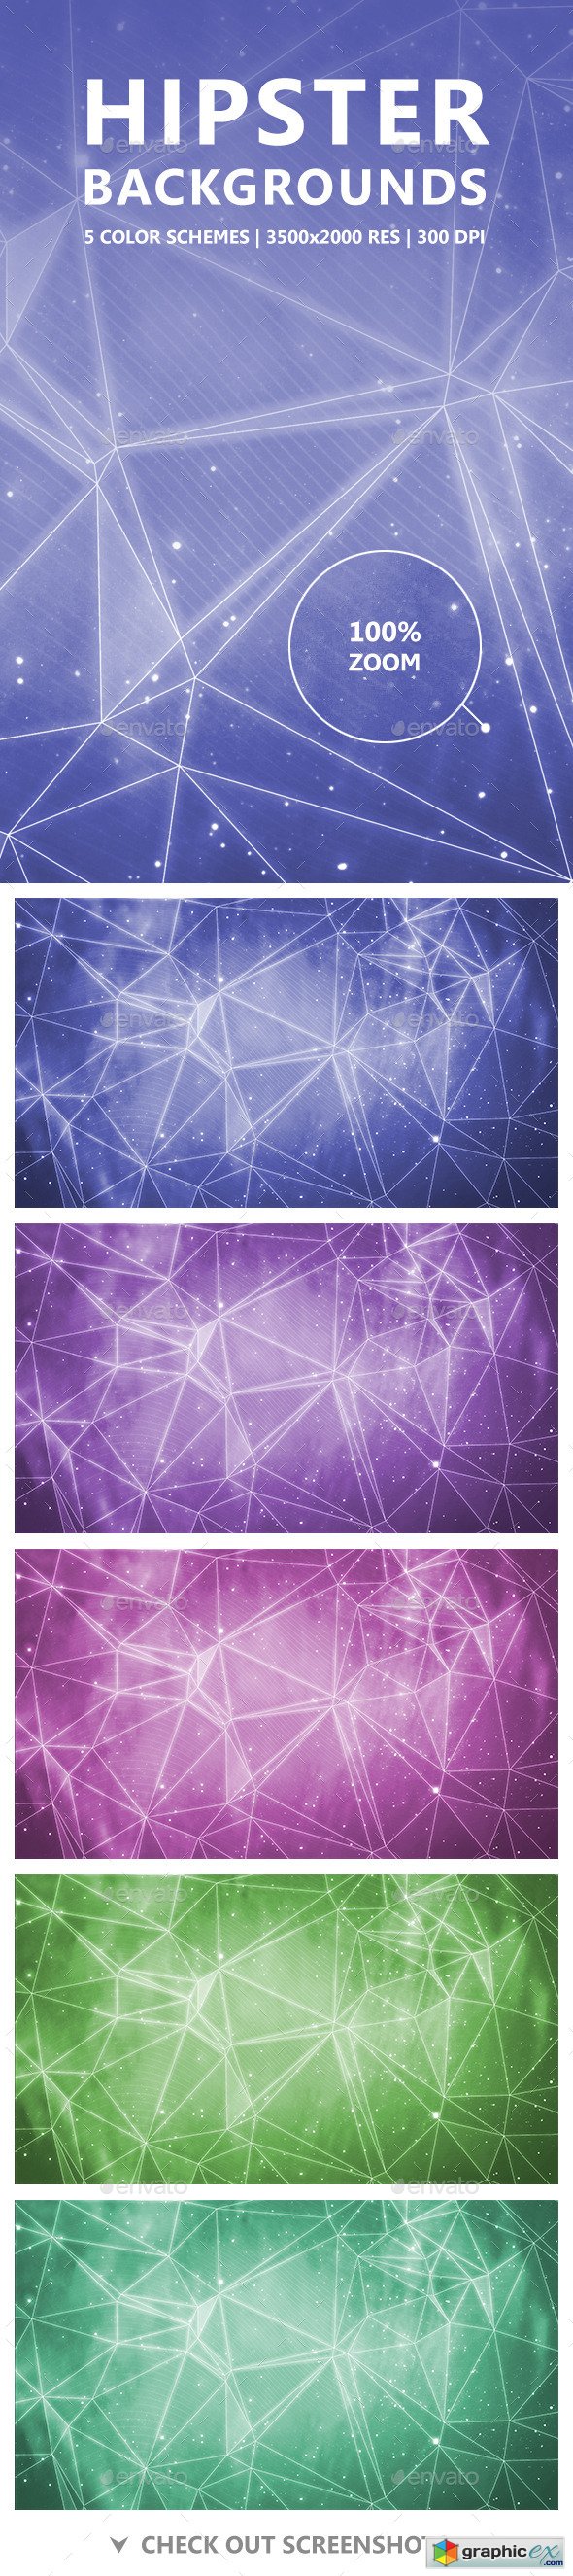 Hipster Backgrounds